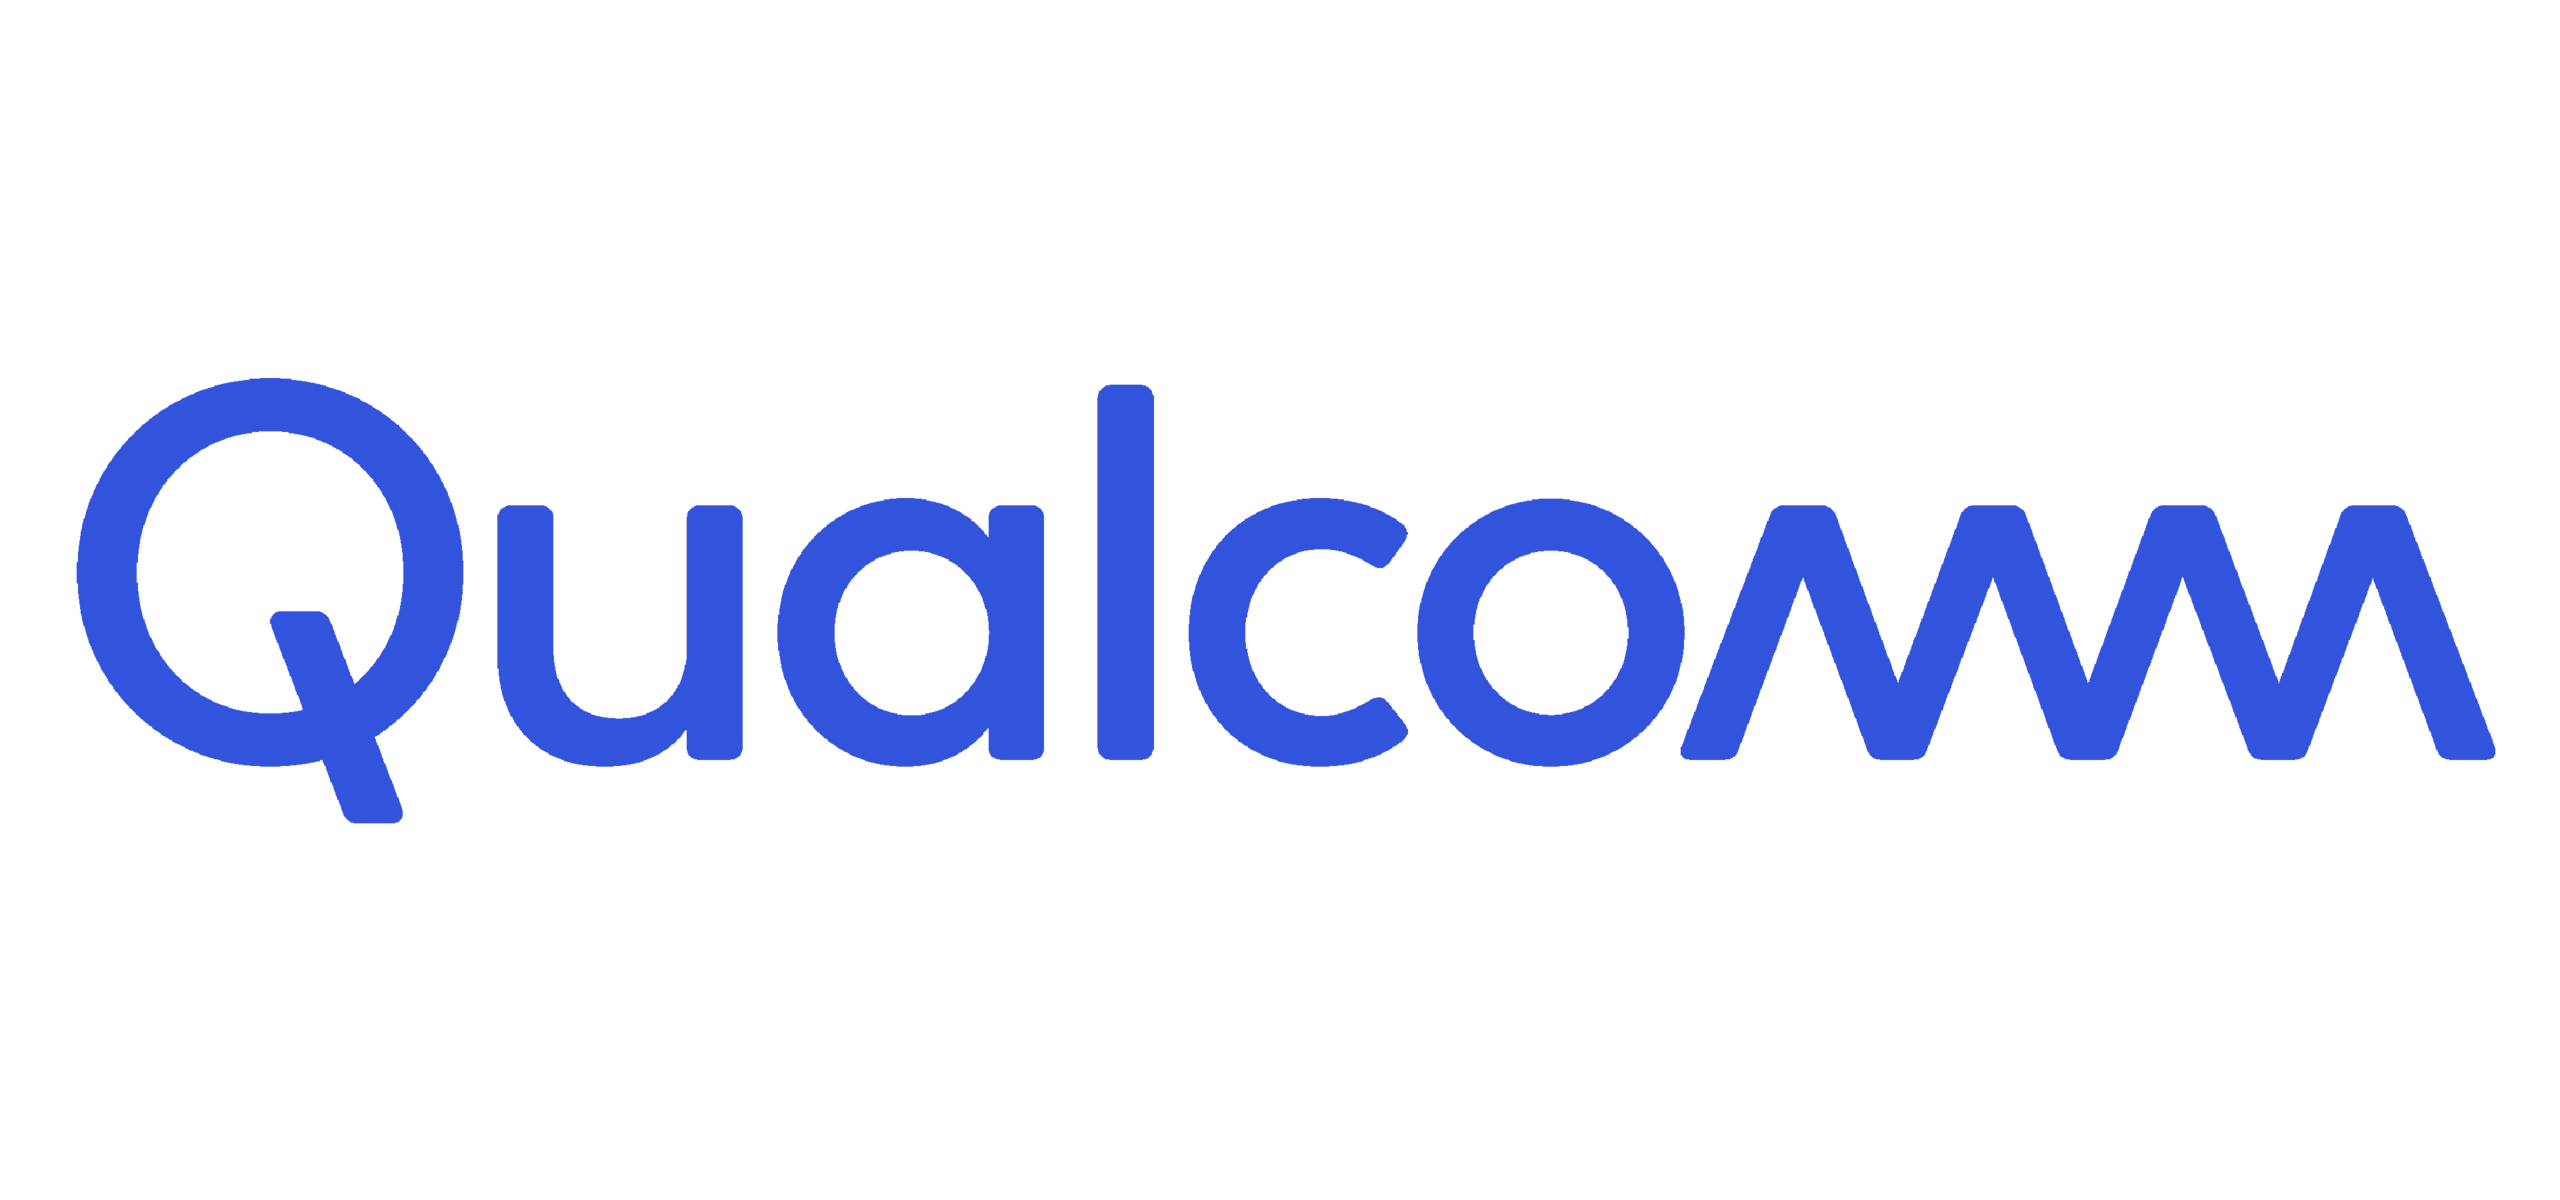 Qualcomm's latest jobs internships for college students